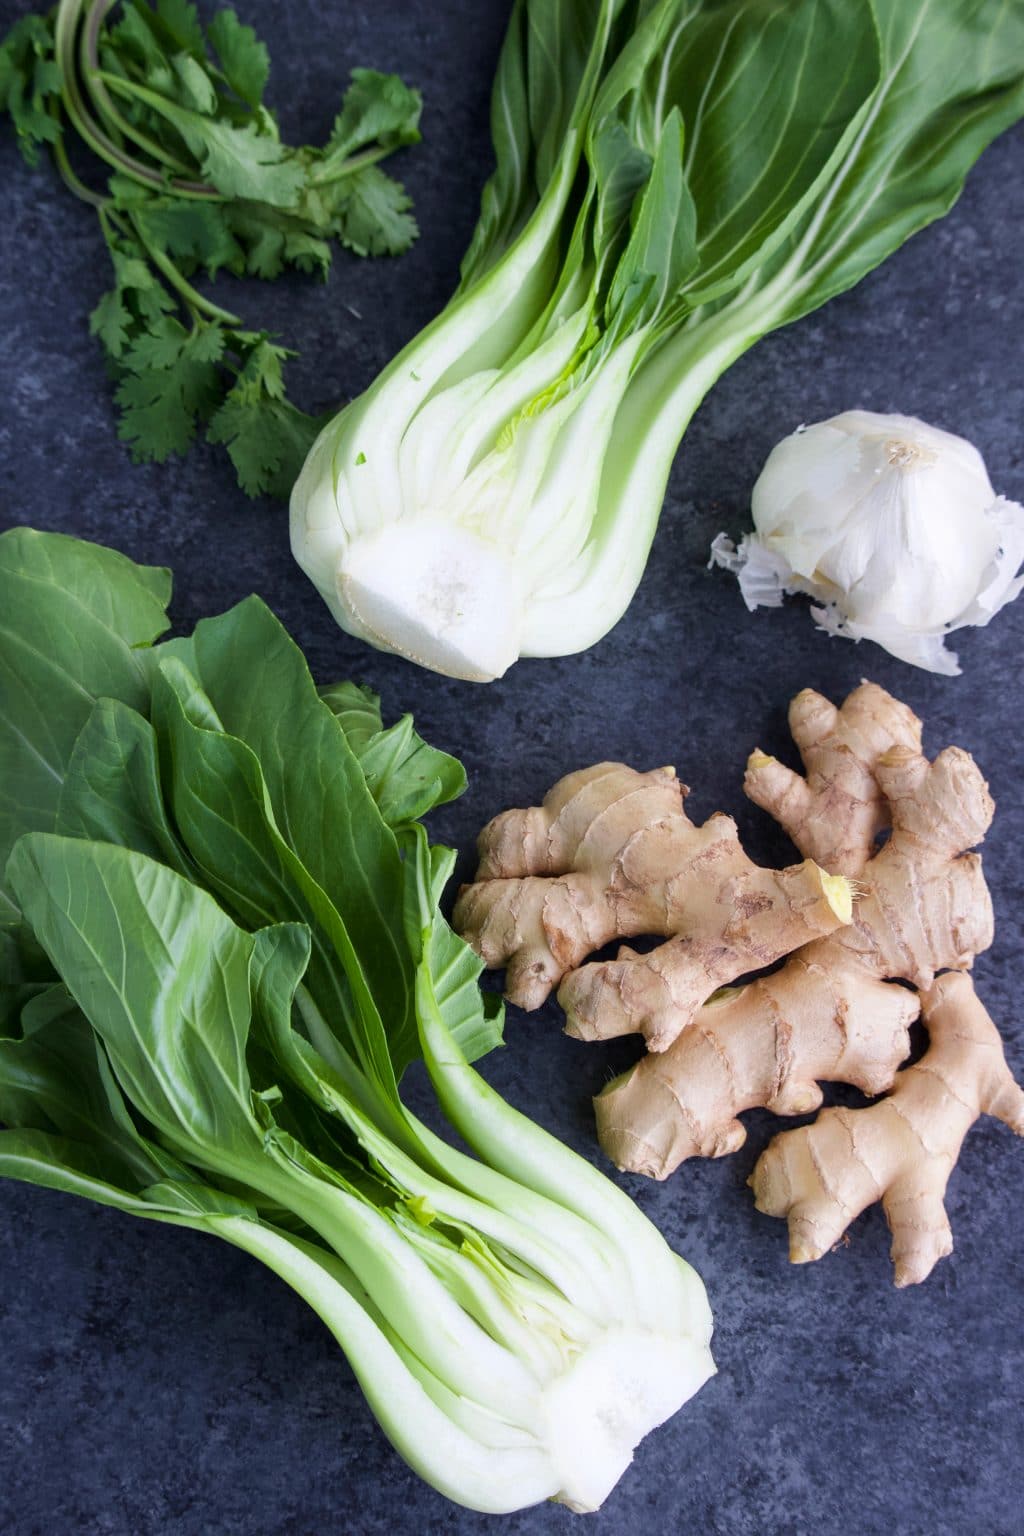 Bok choy, ginger, garlic, and cilantro laying on a dark background.